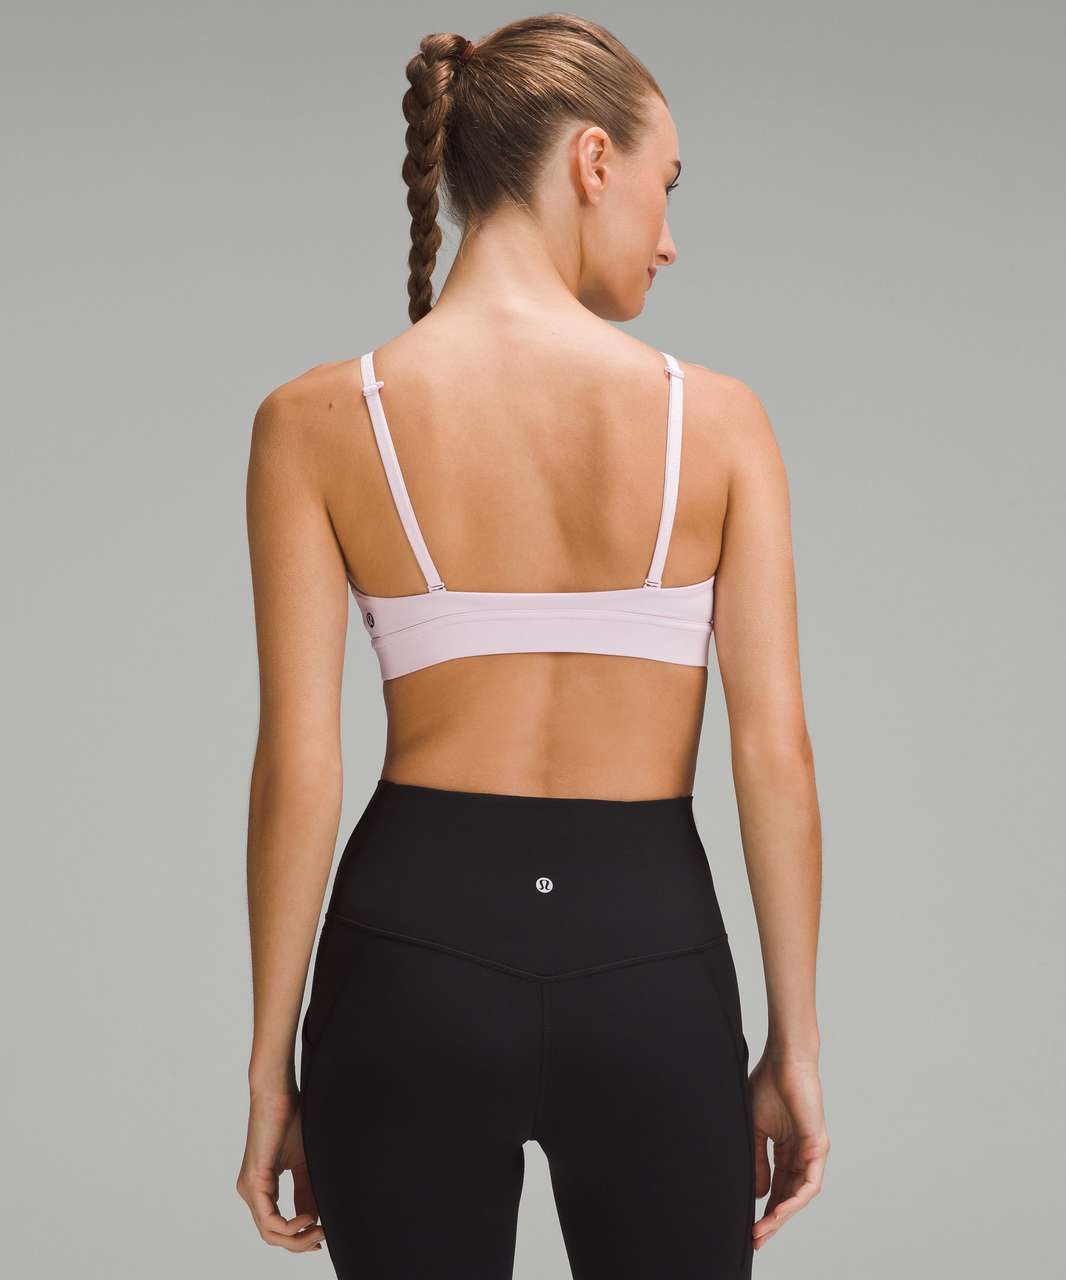 Lululemon License to Train Triangle Bra Light Support, A/B Cup *Logo - Meadowsweet Pink